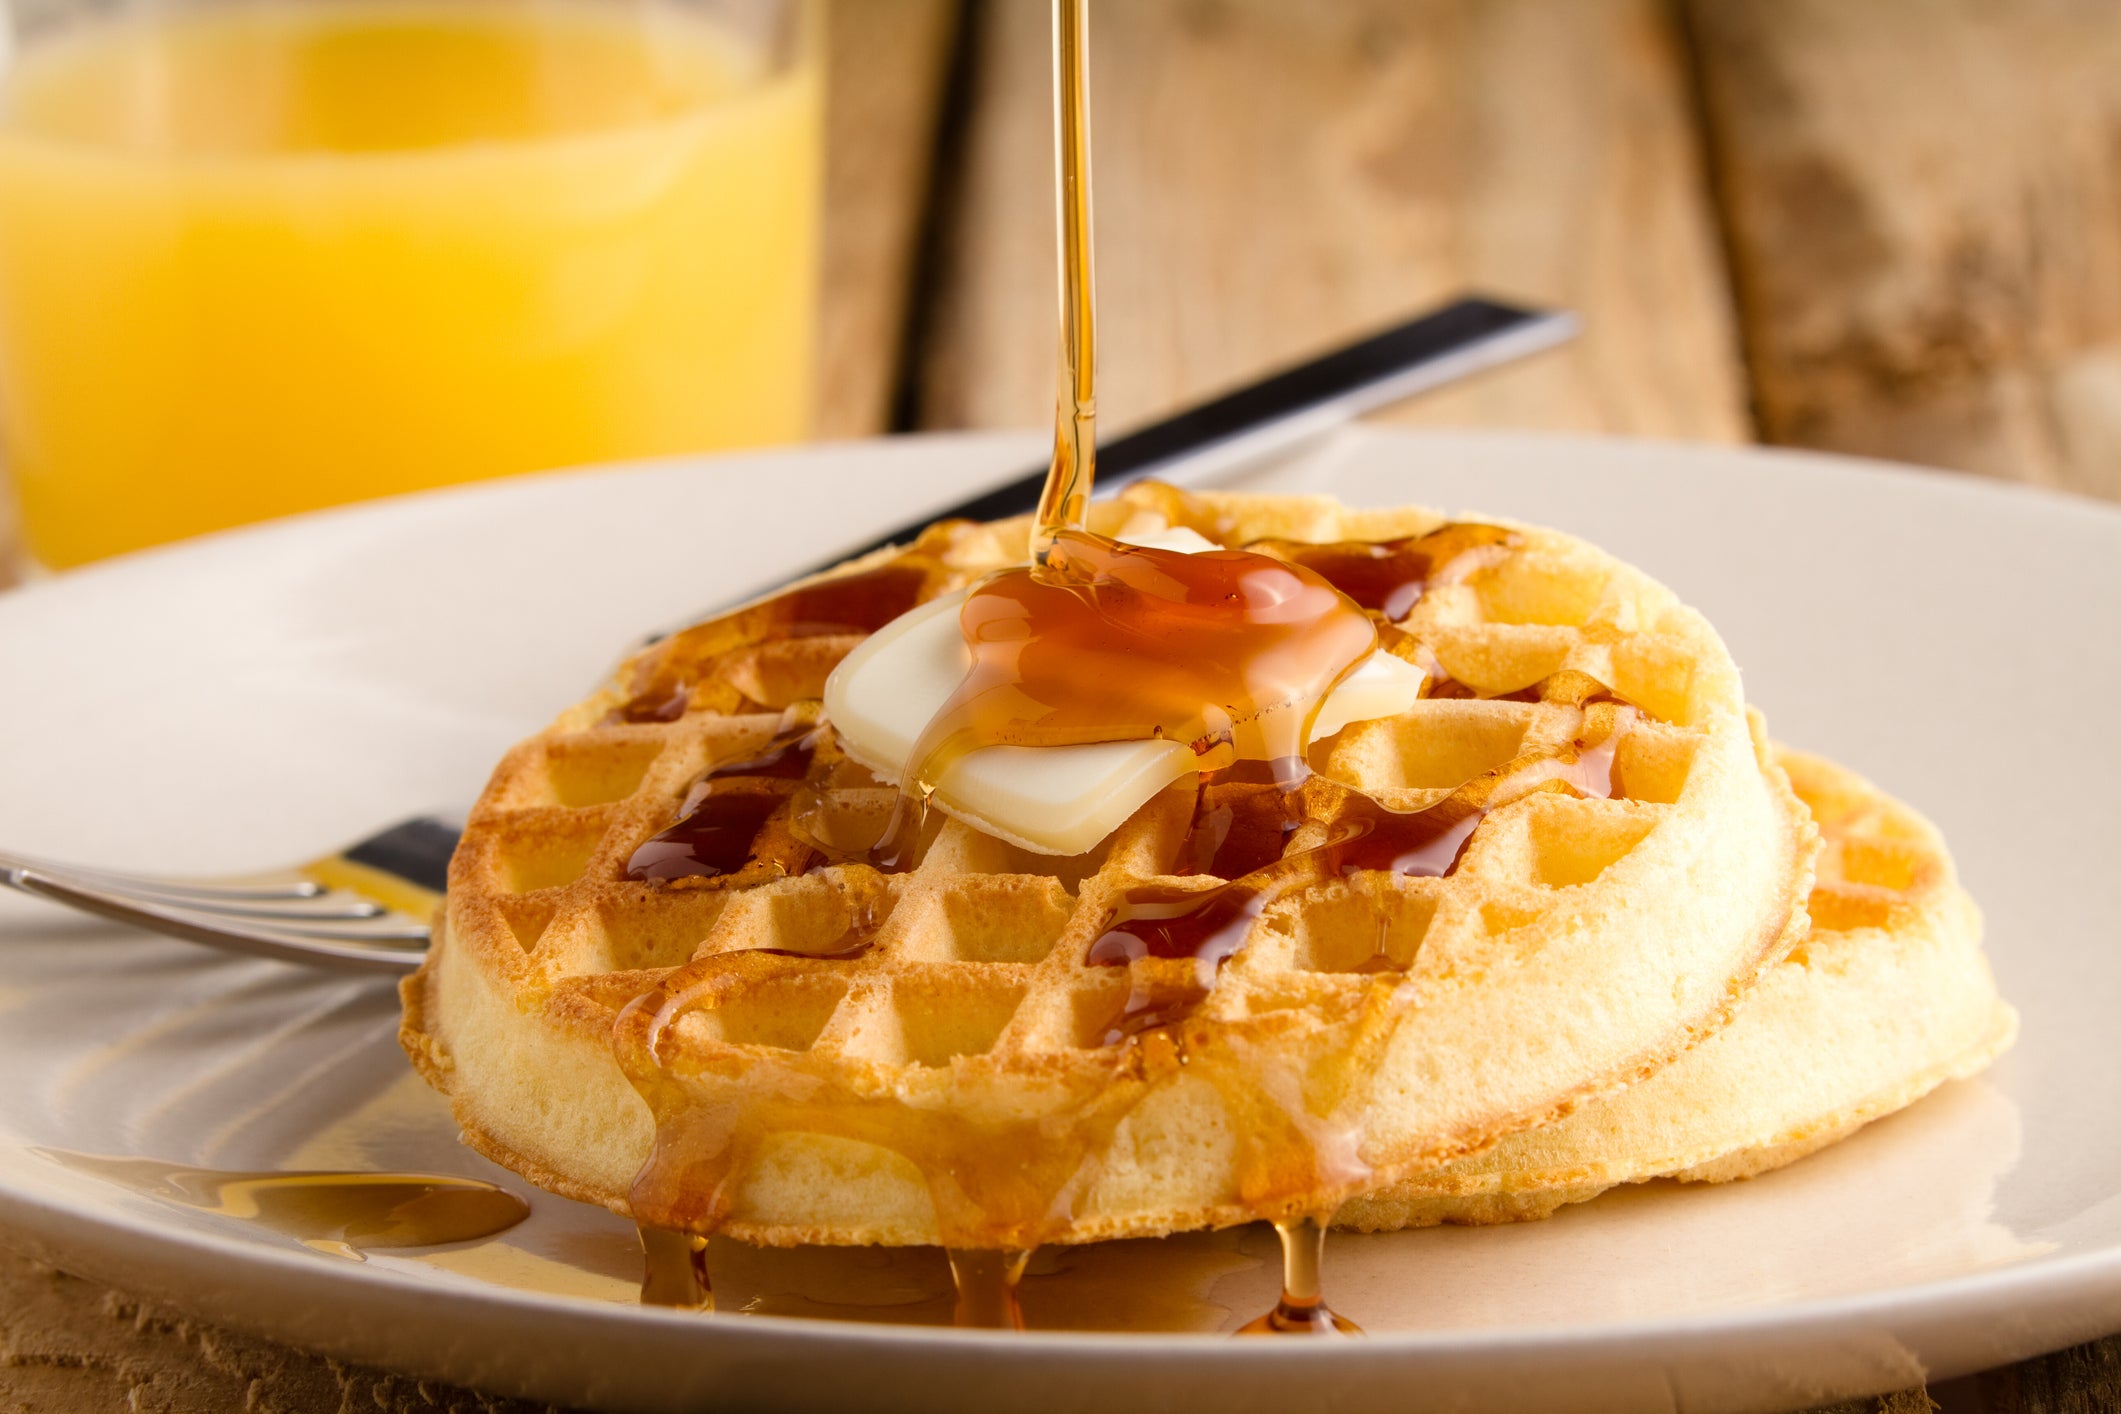 Belgian waffle topped with butter and syrup